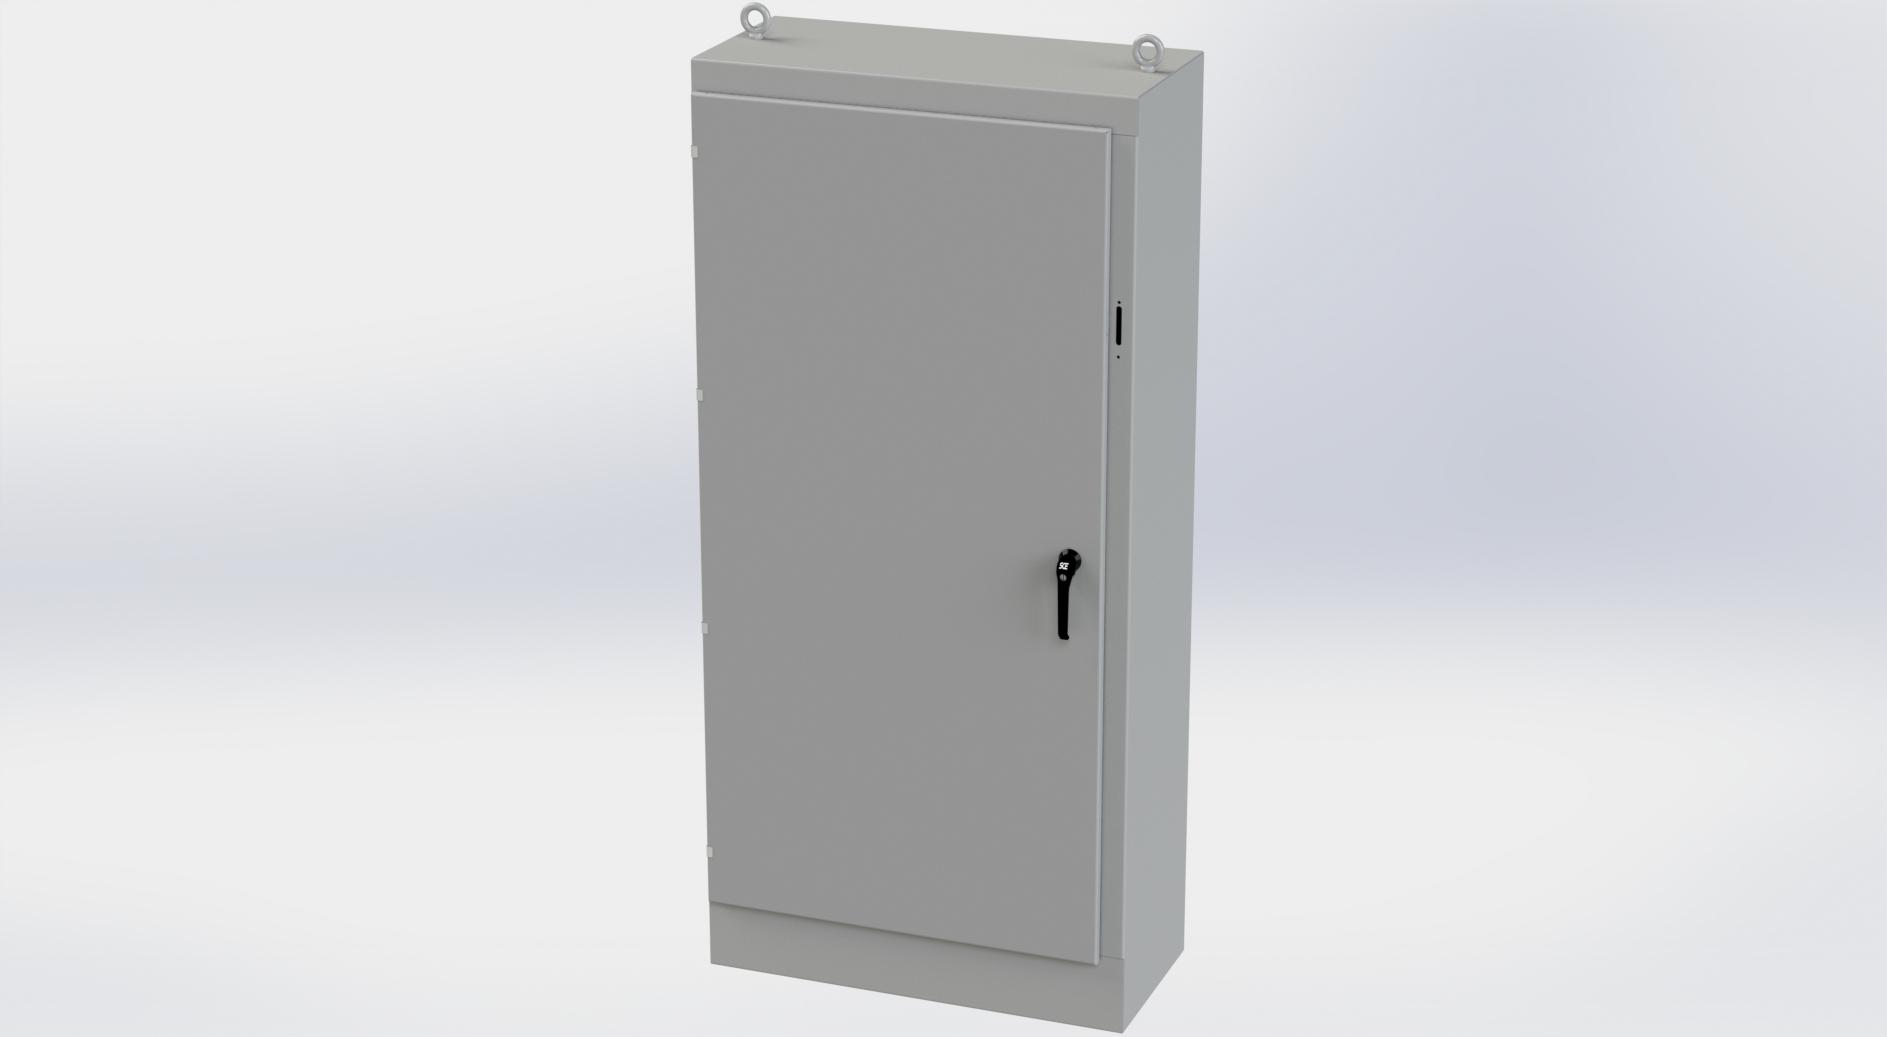 Saginaw Control SCE-84XM4018G 1DR XM Enclosure, Height:84.00", Width:39.50", Depth:18.00", ANSI-61 gray powder coating inside and out. Sub-panels are powder coated white.  